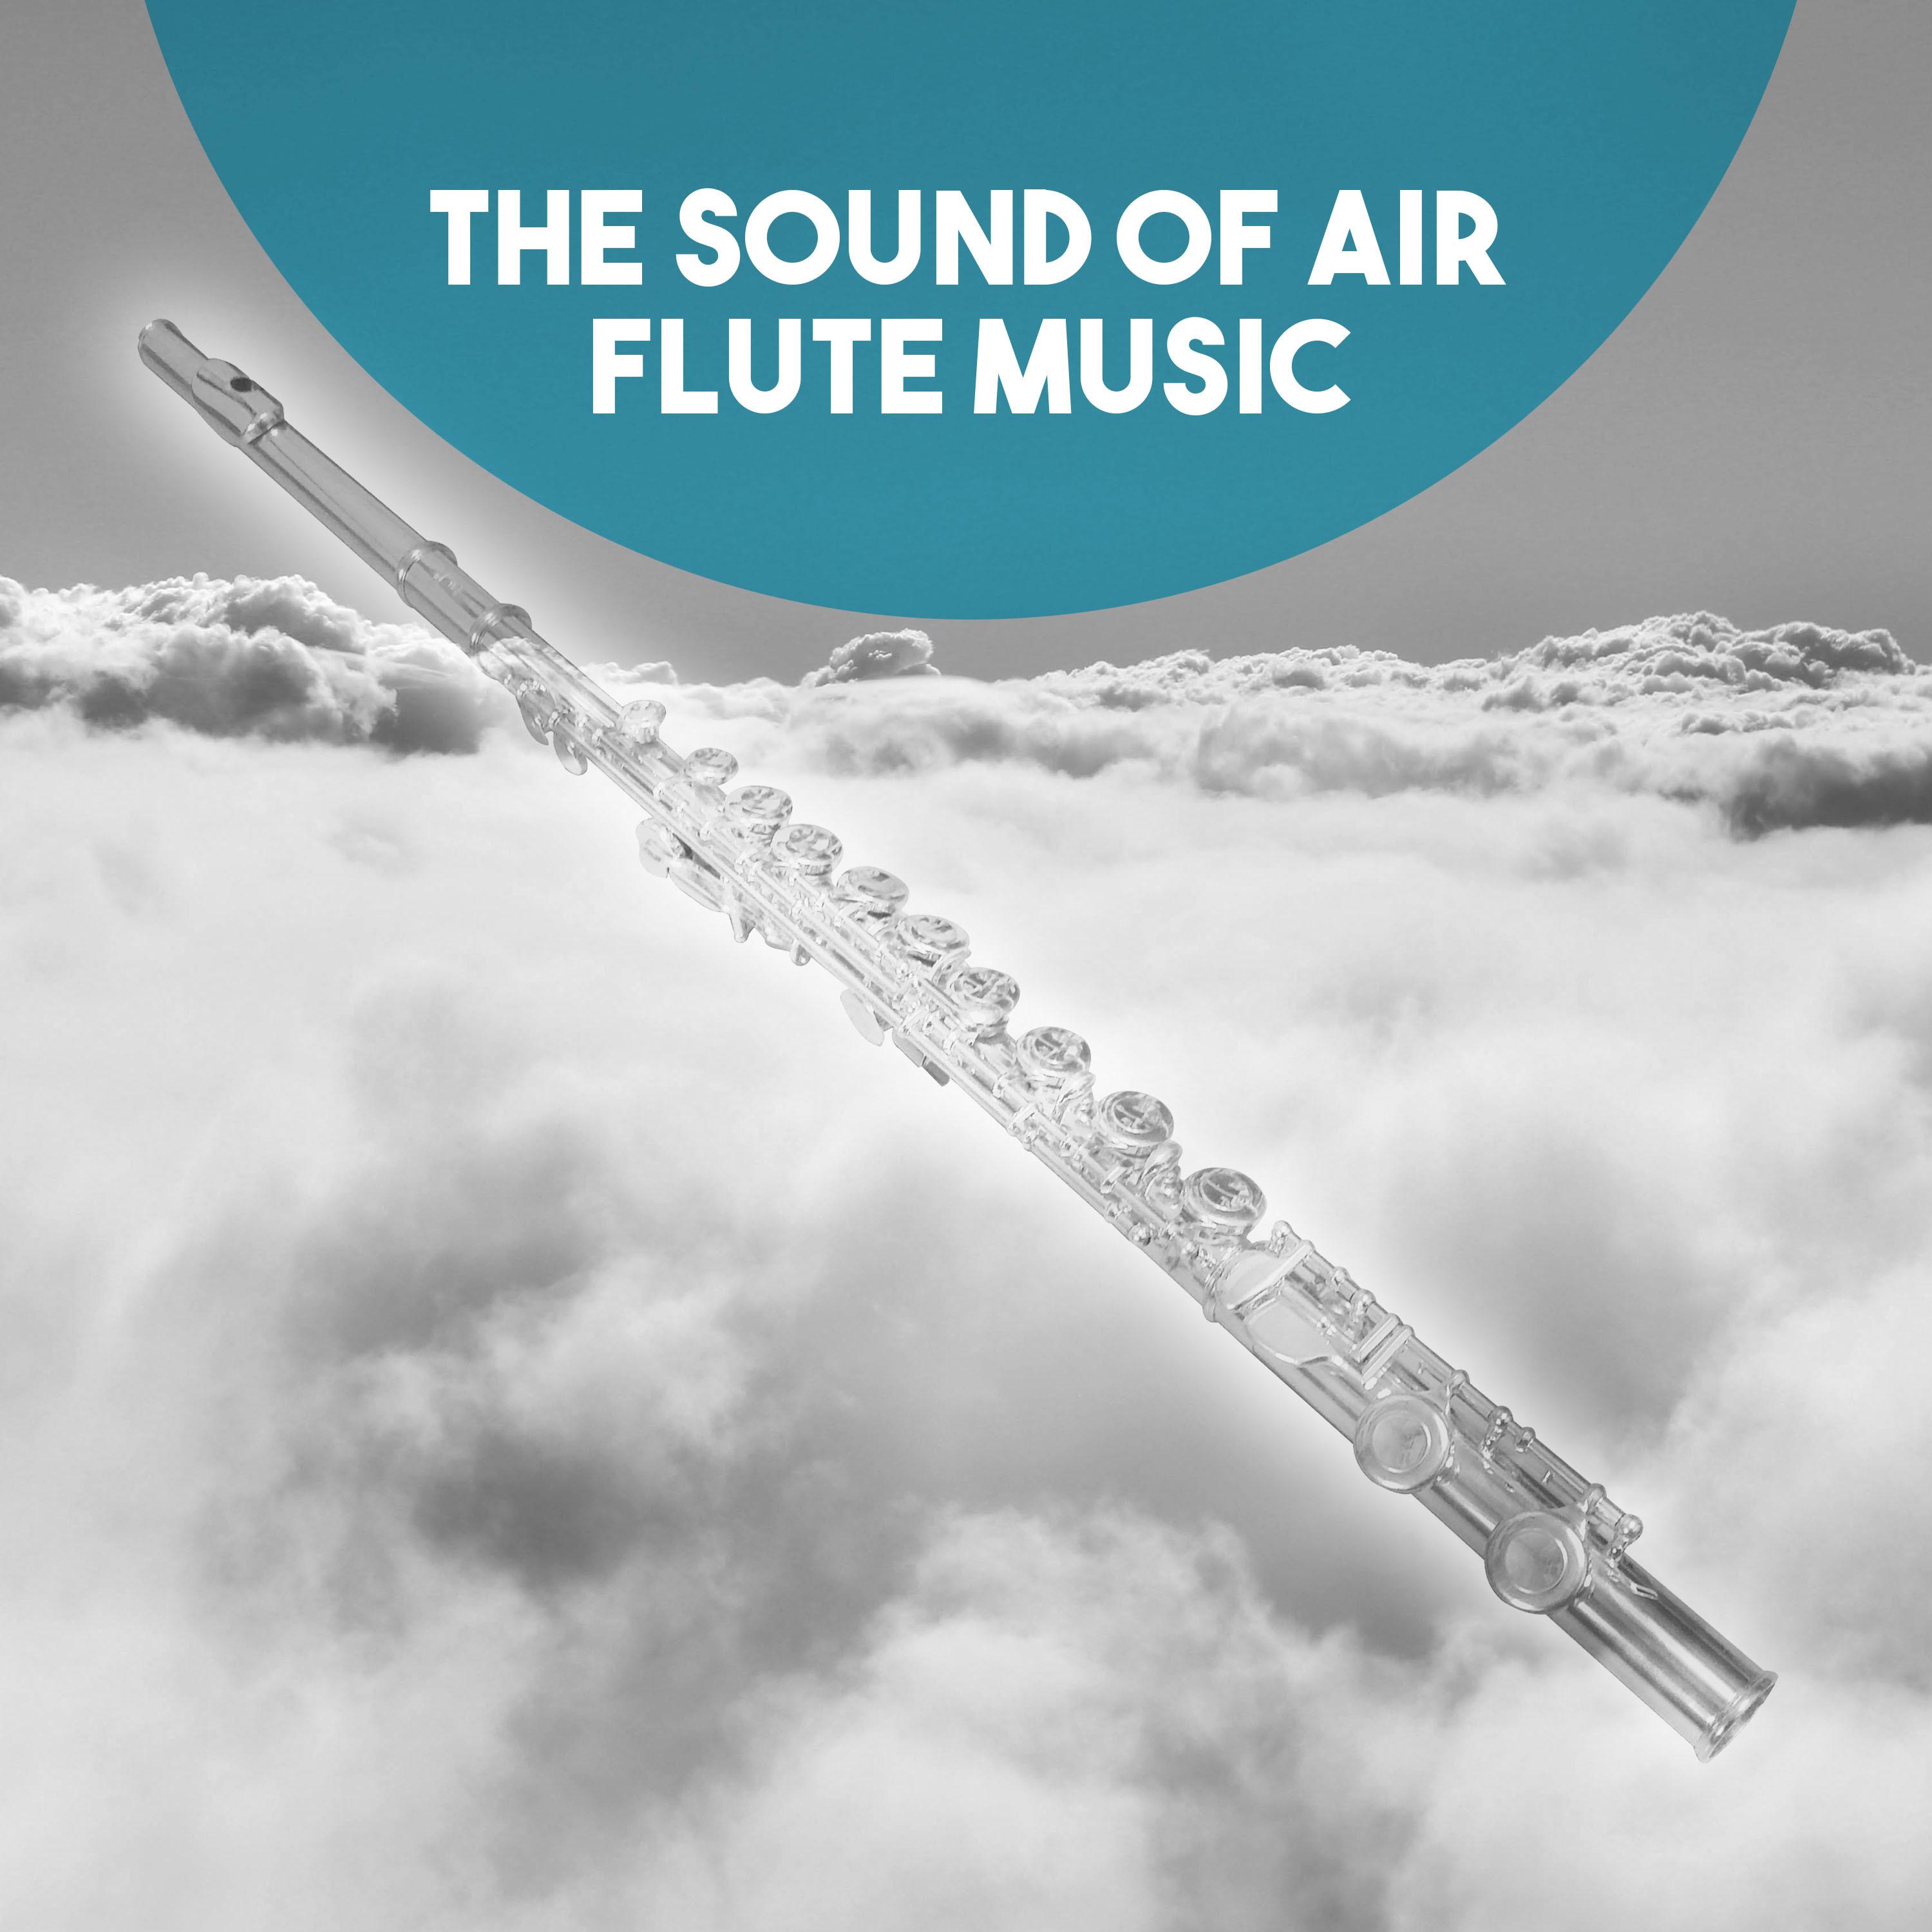 The Sound of Air: Flute Music